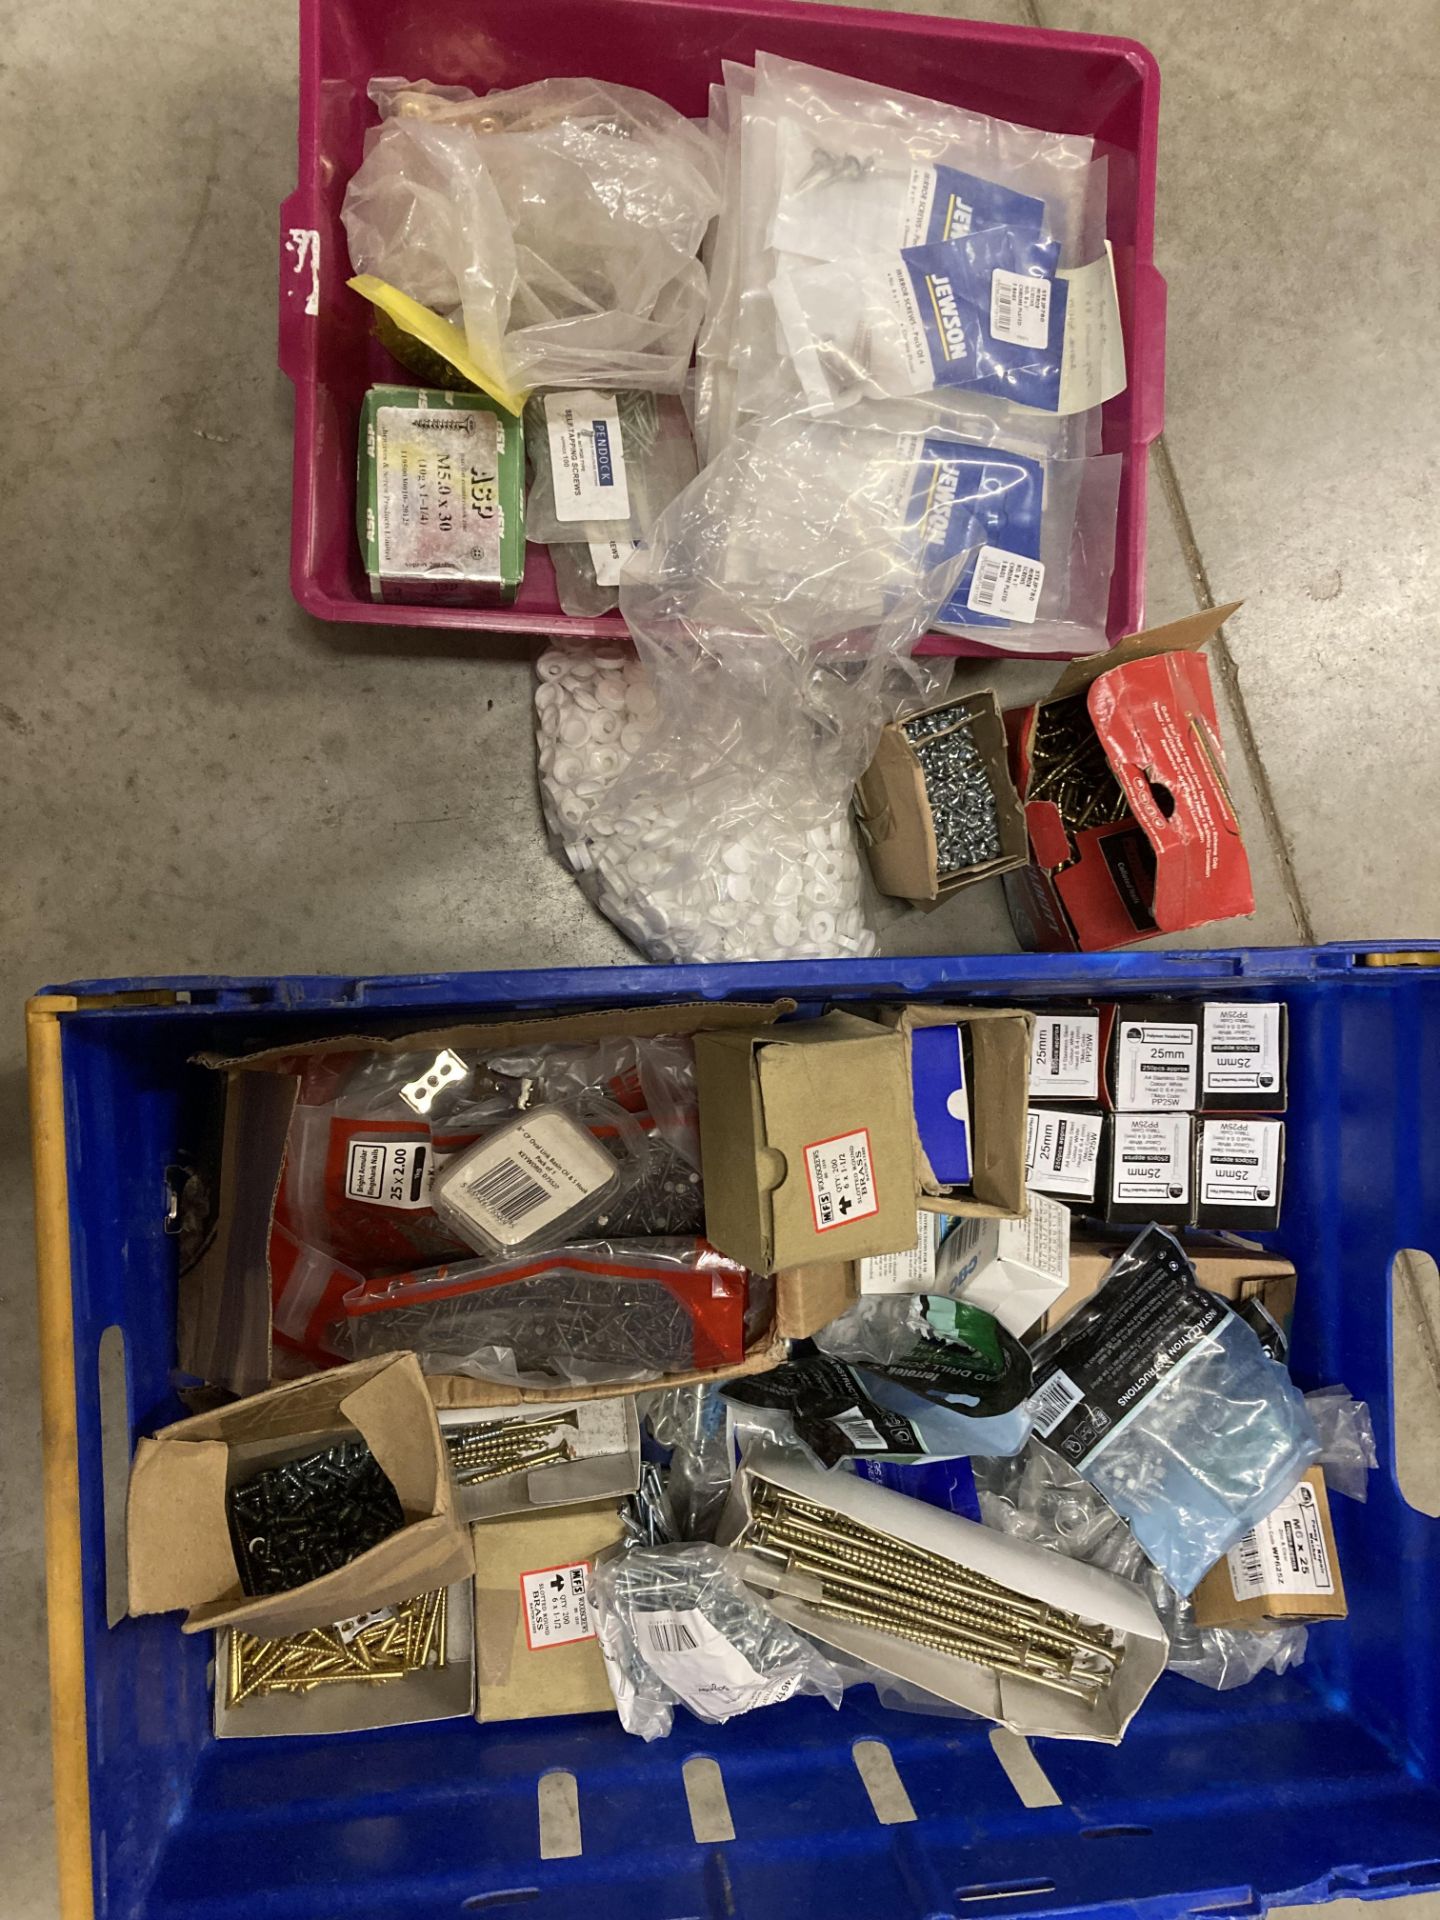 Contents to crate - a large quantity of assorted screws, nails, nuts and fittings etc.